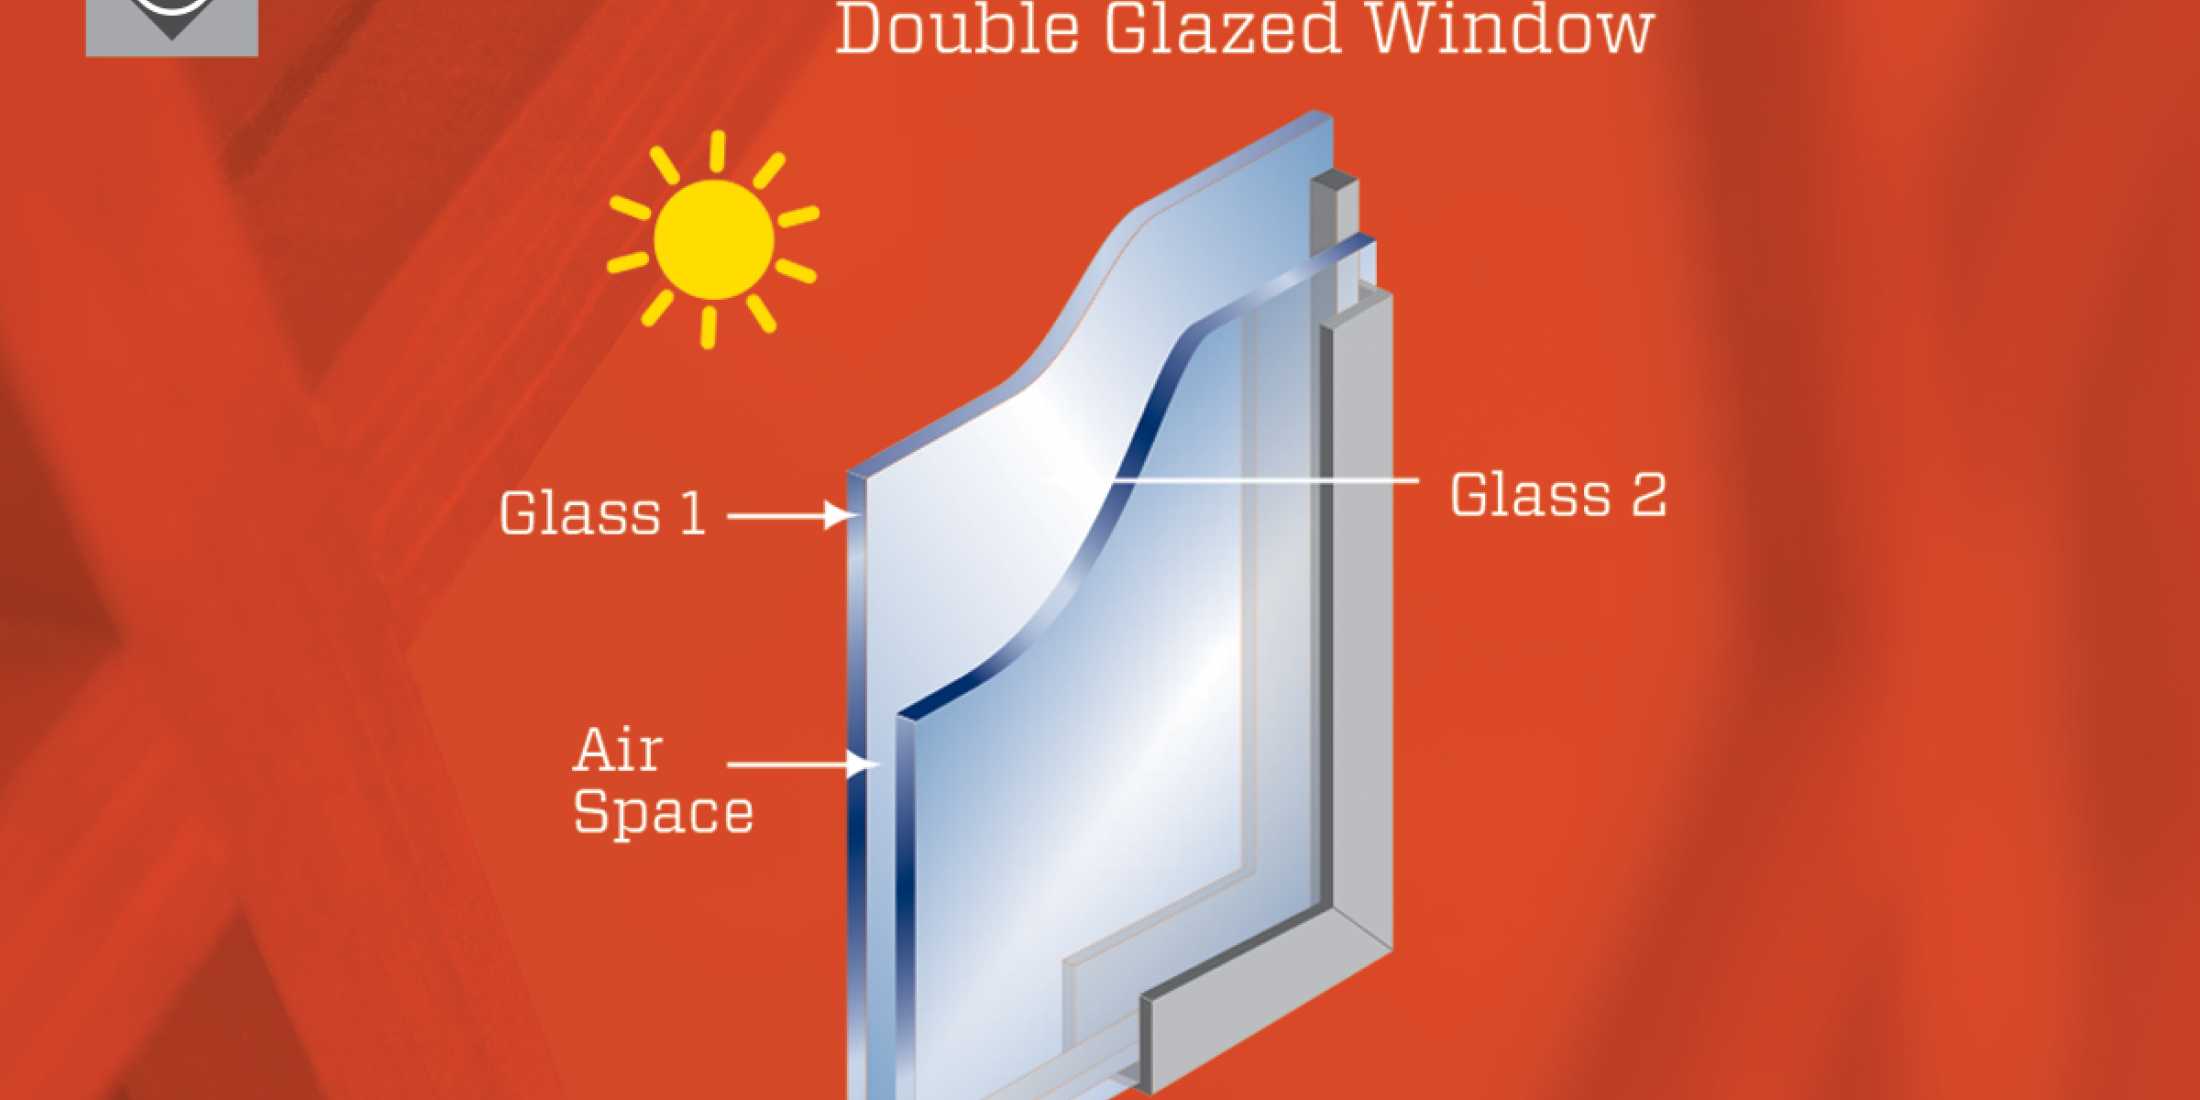 How does double glazing work?